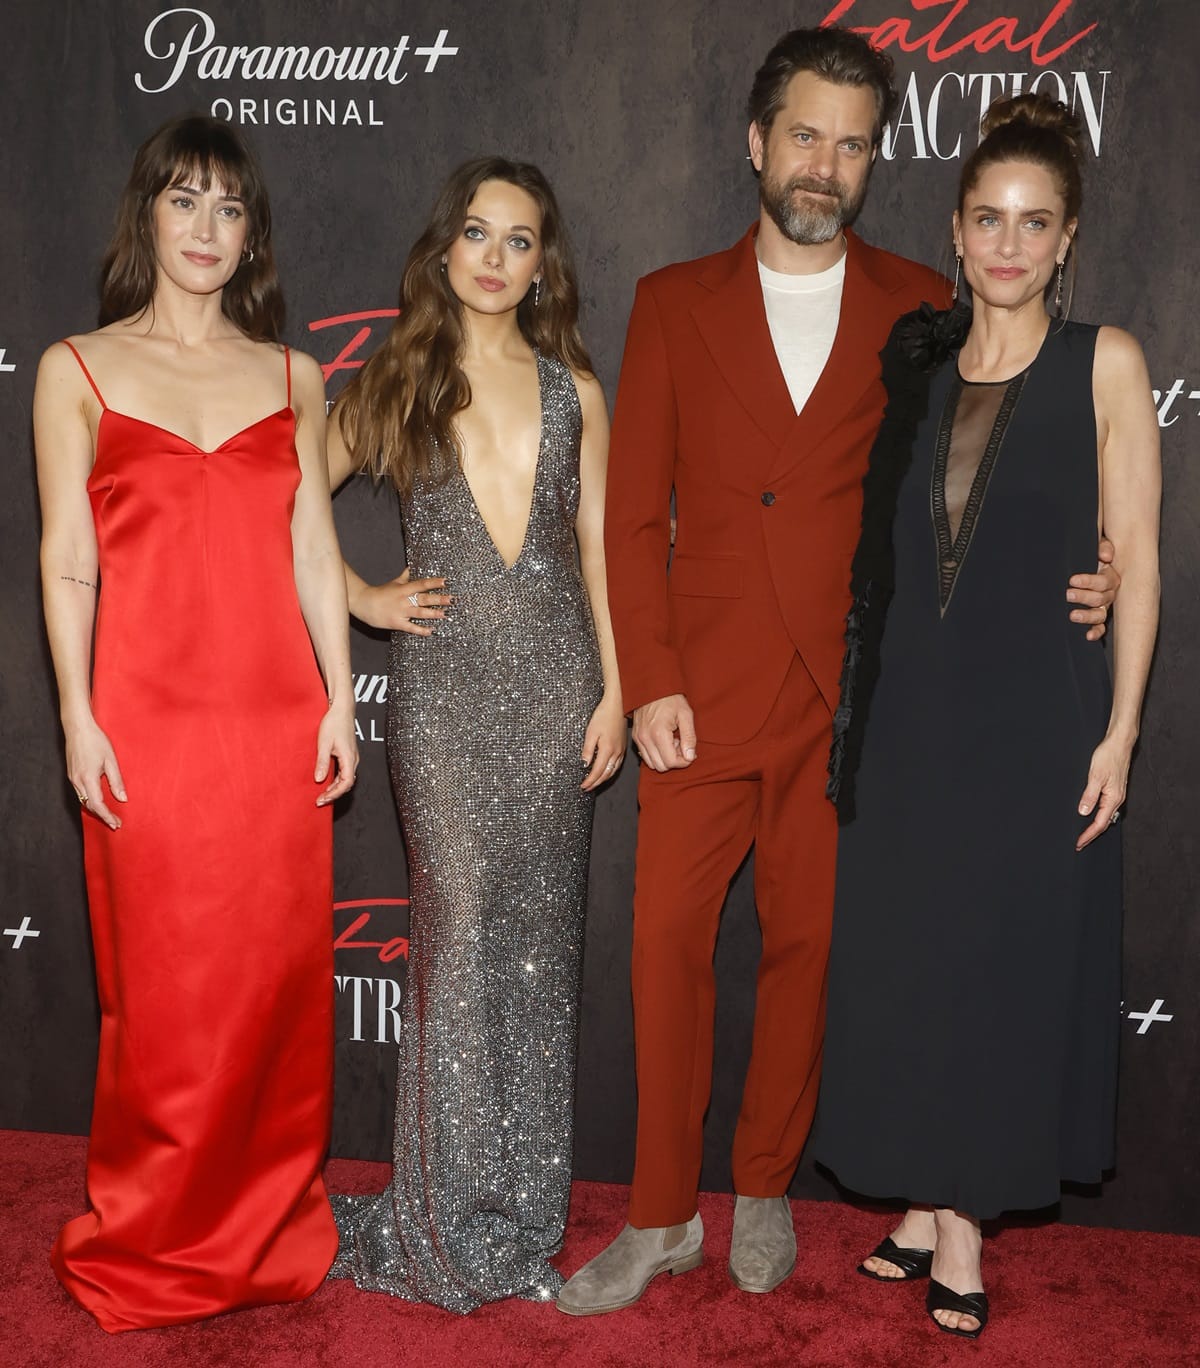 With a towering height of 6ft 1 (185.4 cm), Joshua Jackson stands much taller than his "Fatal Attraction" co-stars Lizzy Caplan, Alyssa Jirrels, and Amanda Peet